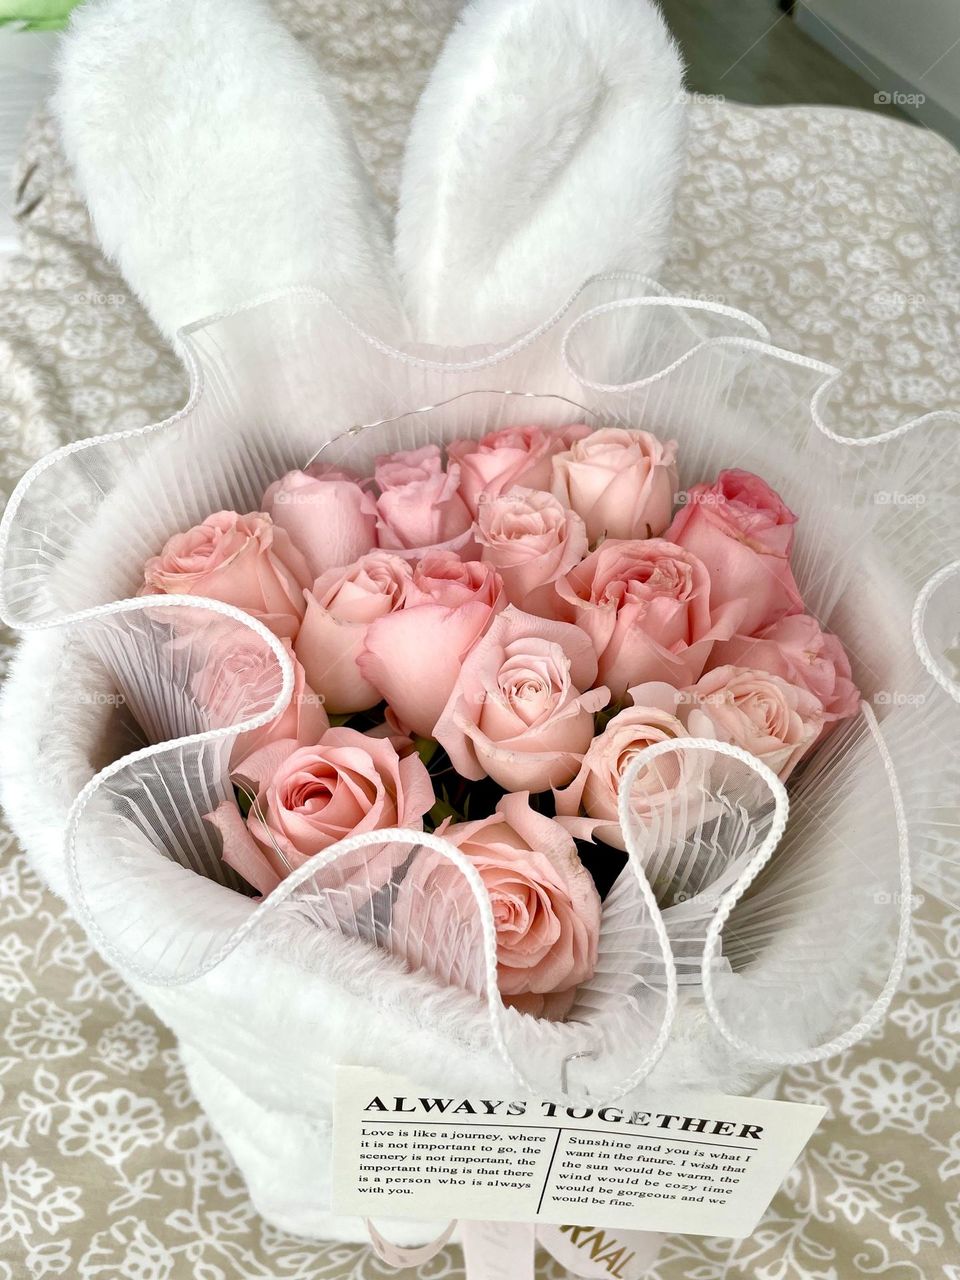 Bunch of open baby pink roses in white covering on bed